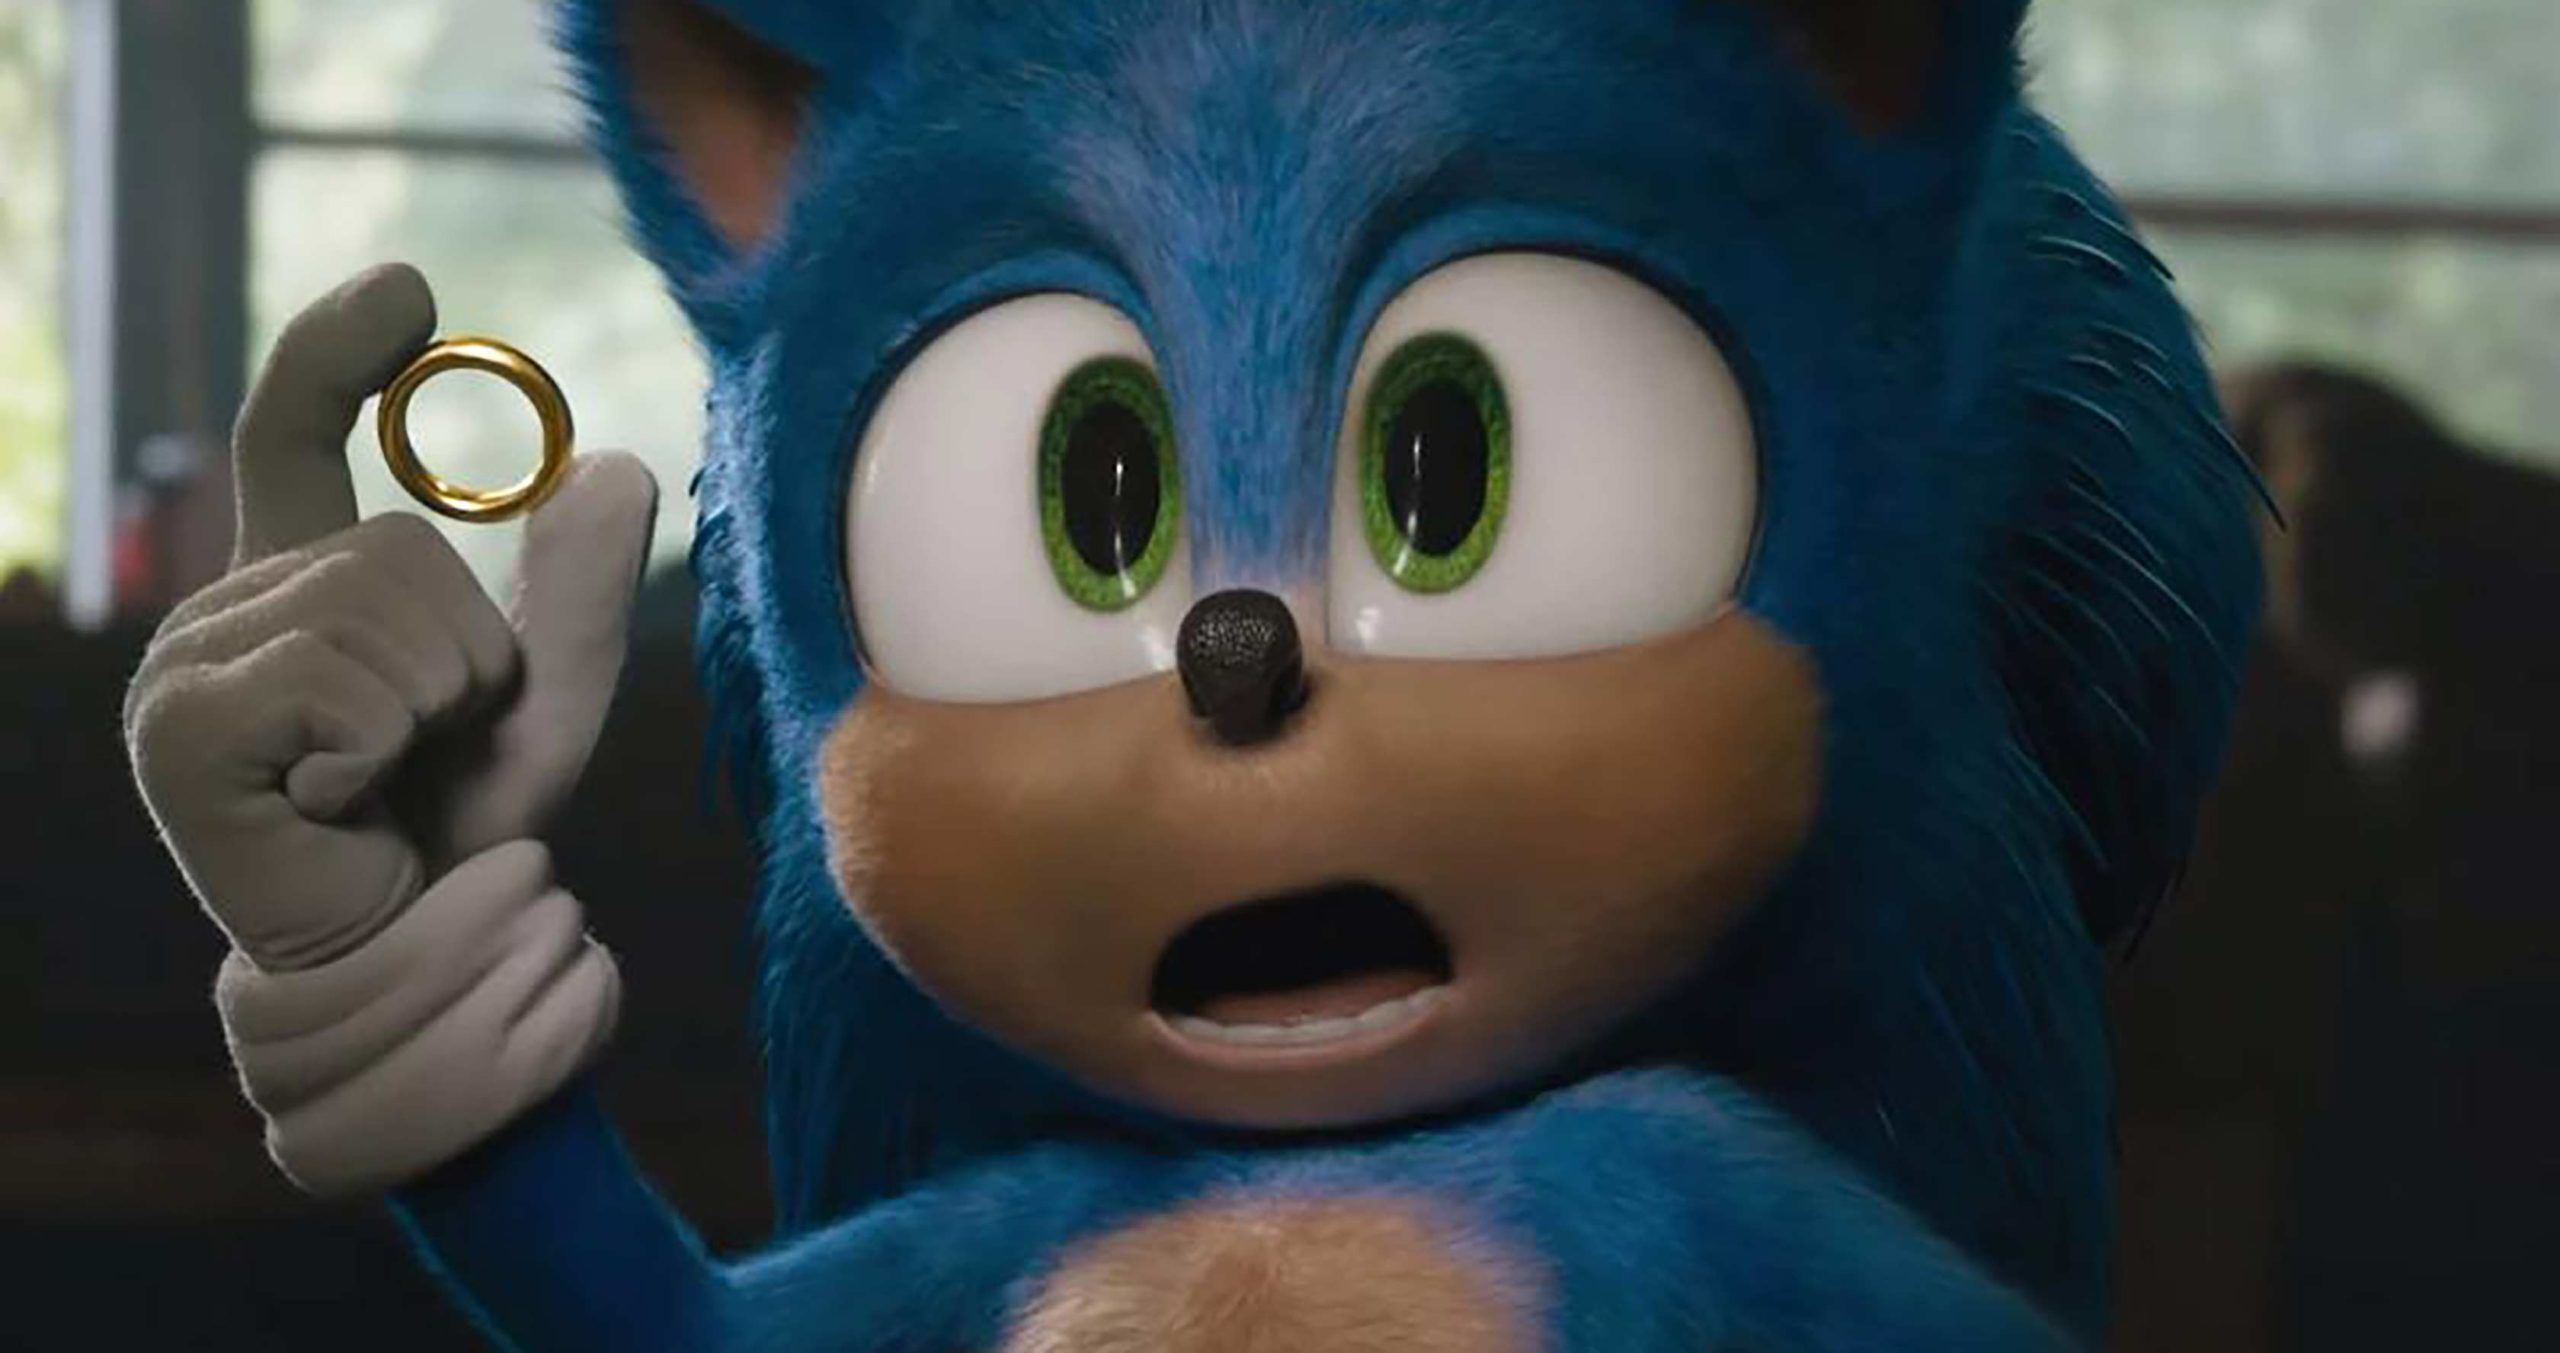 Sonic The Hedgehog Movie Gets Early Digital Release Due To COVID 19